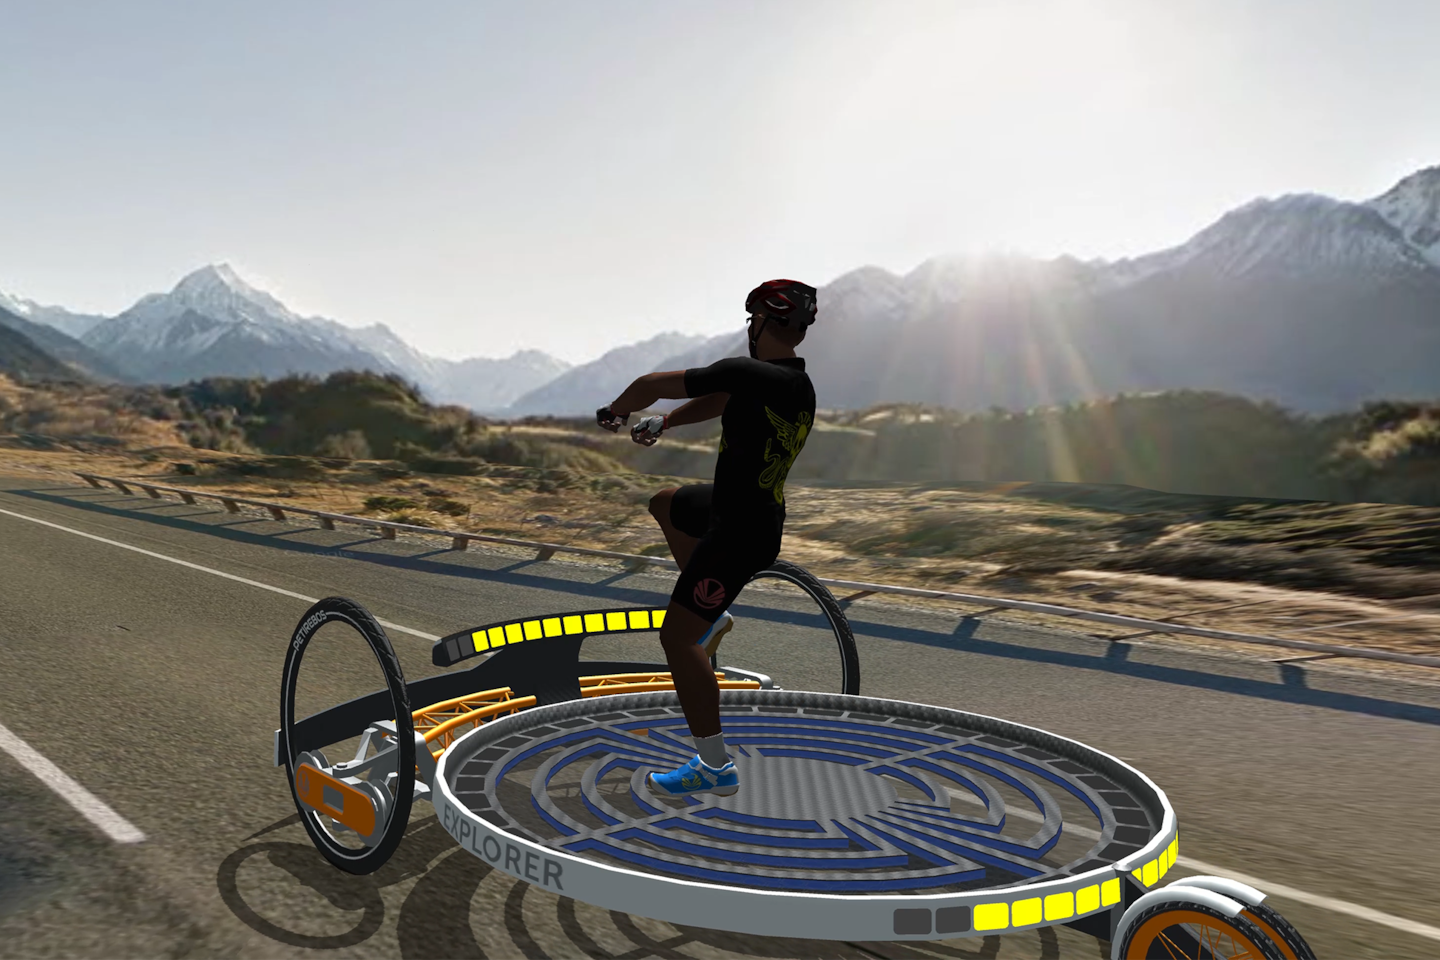 VR exercise app ‘VZfit’ overwhelms the senses in all the wrong ways